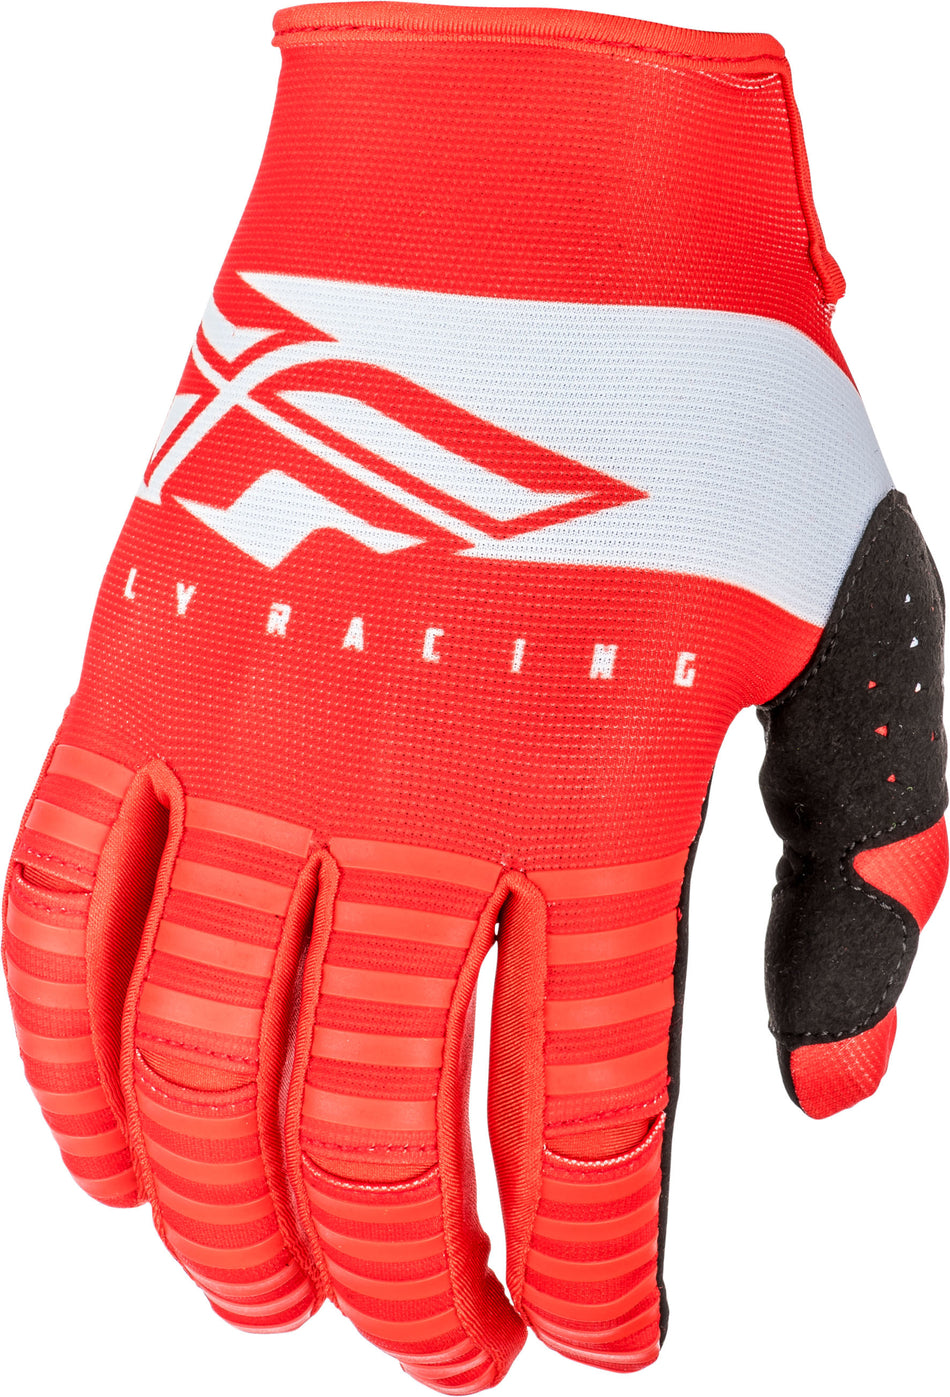 FLY RACING Kinetic Shield Gloves Red/White Sz 04 372-41204